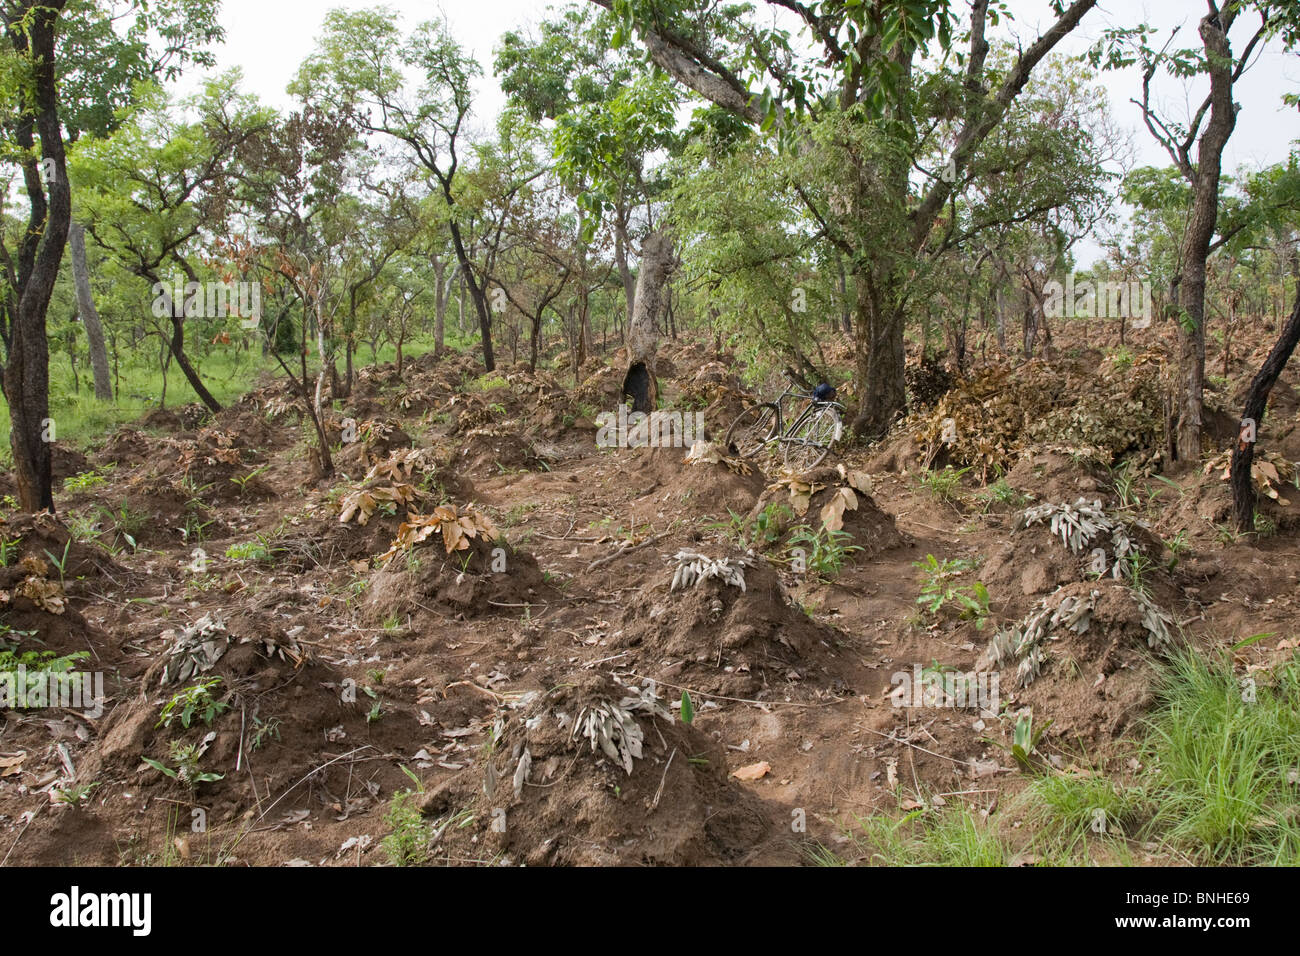 Yam cultivation in the Gonja triangle, Damango district, Ghana. Stock Photo